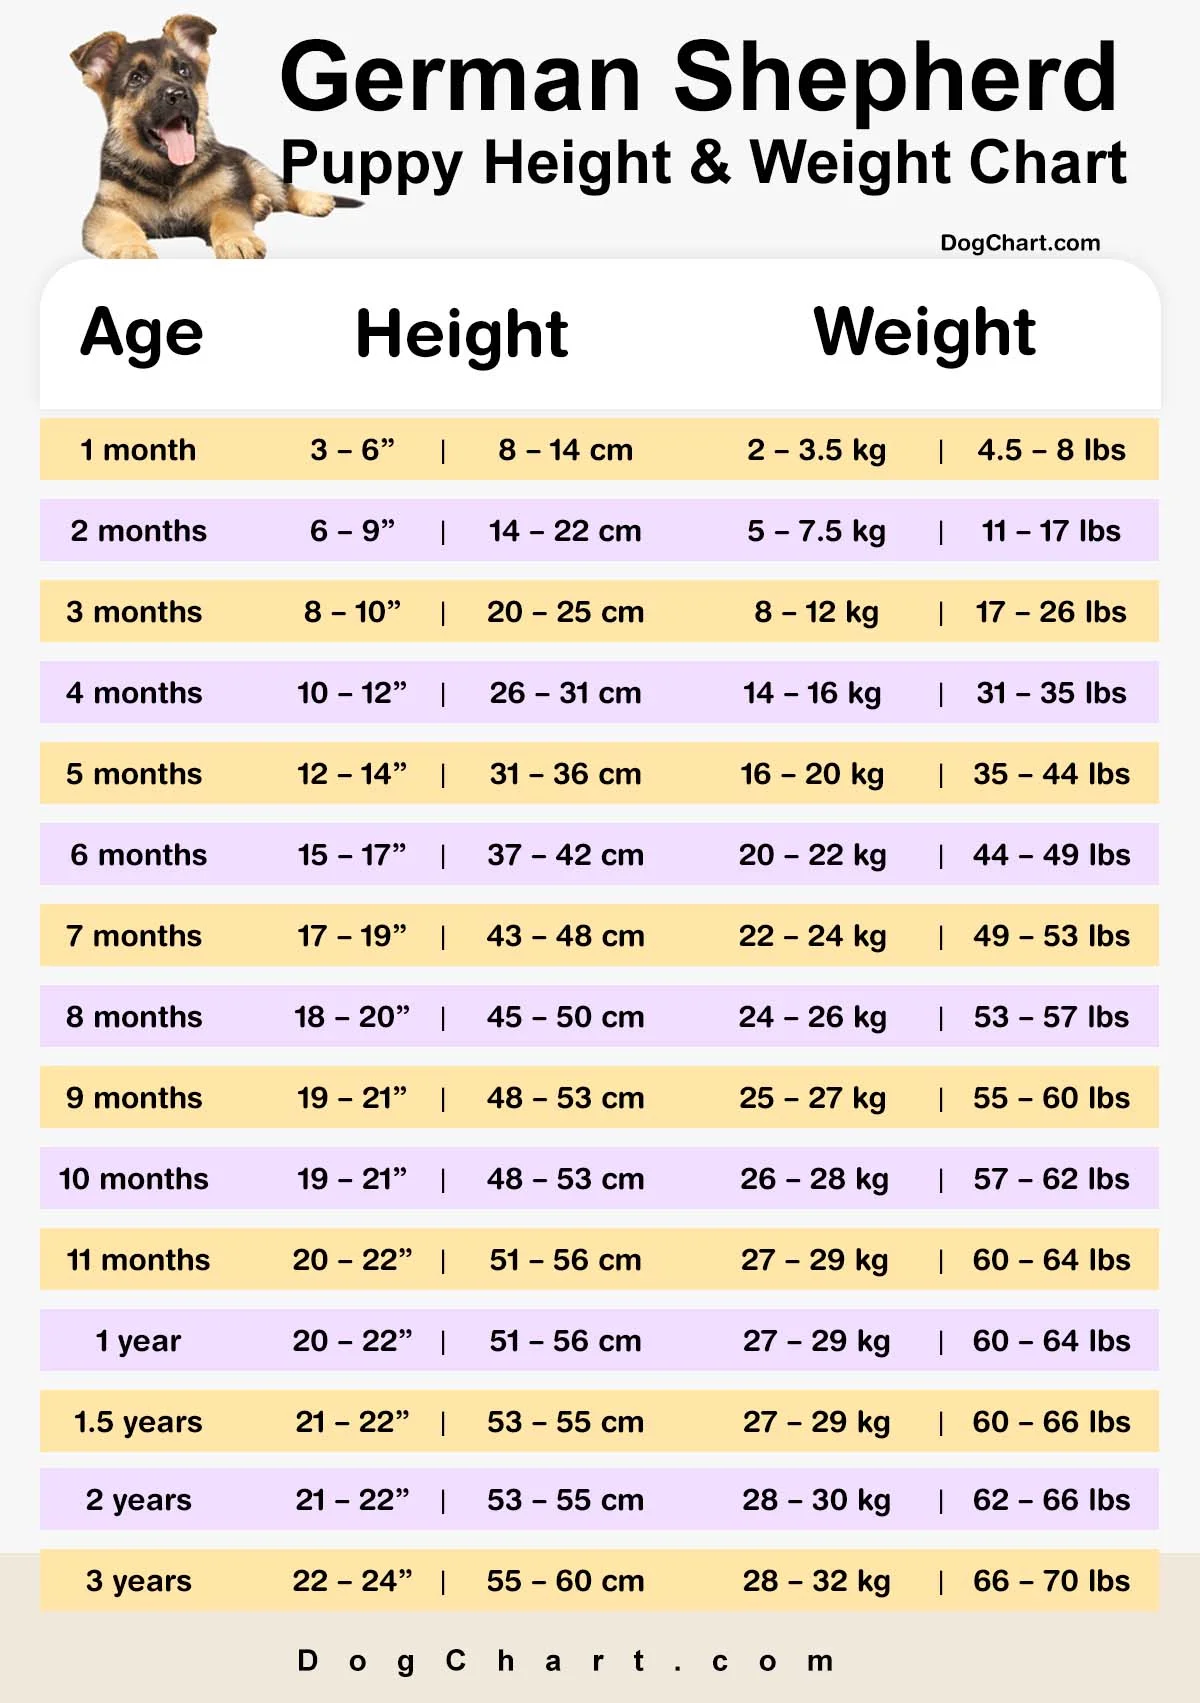 German Shepherd Puppy Height and Weight Chart in Kg & lbs